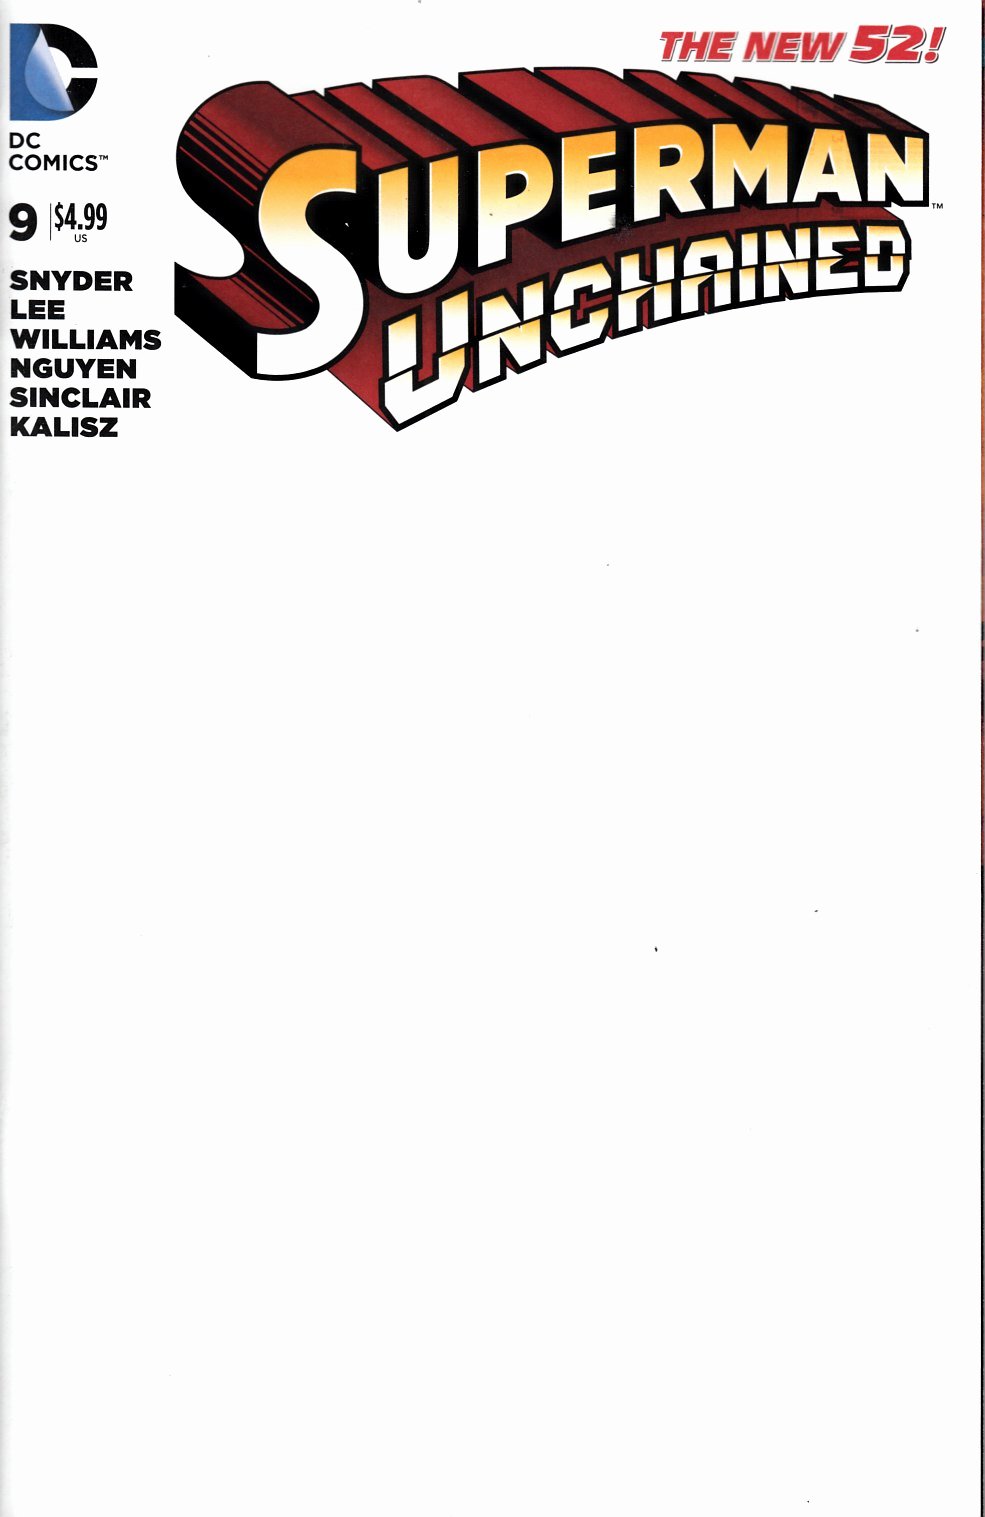 Comic Book Cover Template Lovely Superman Unchained 9 Blank Cover [dc Ic